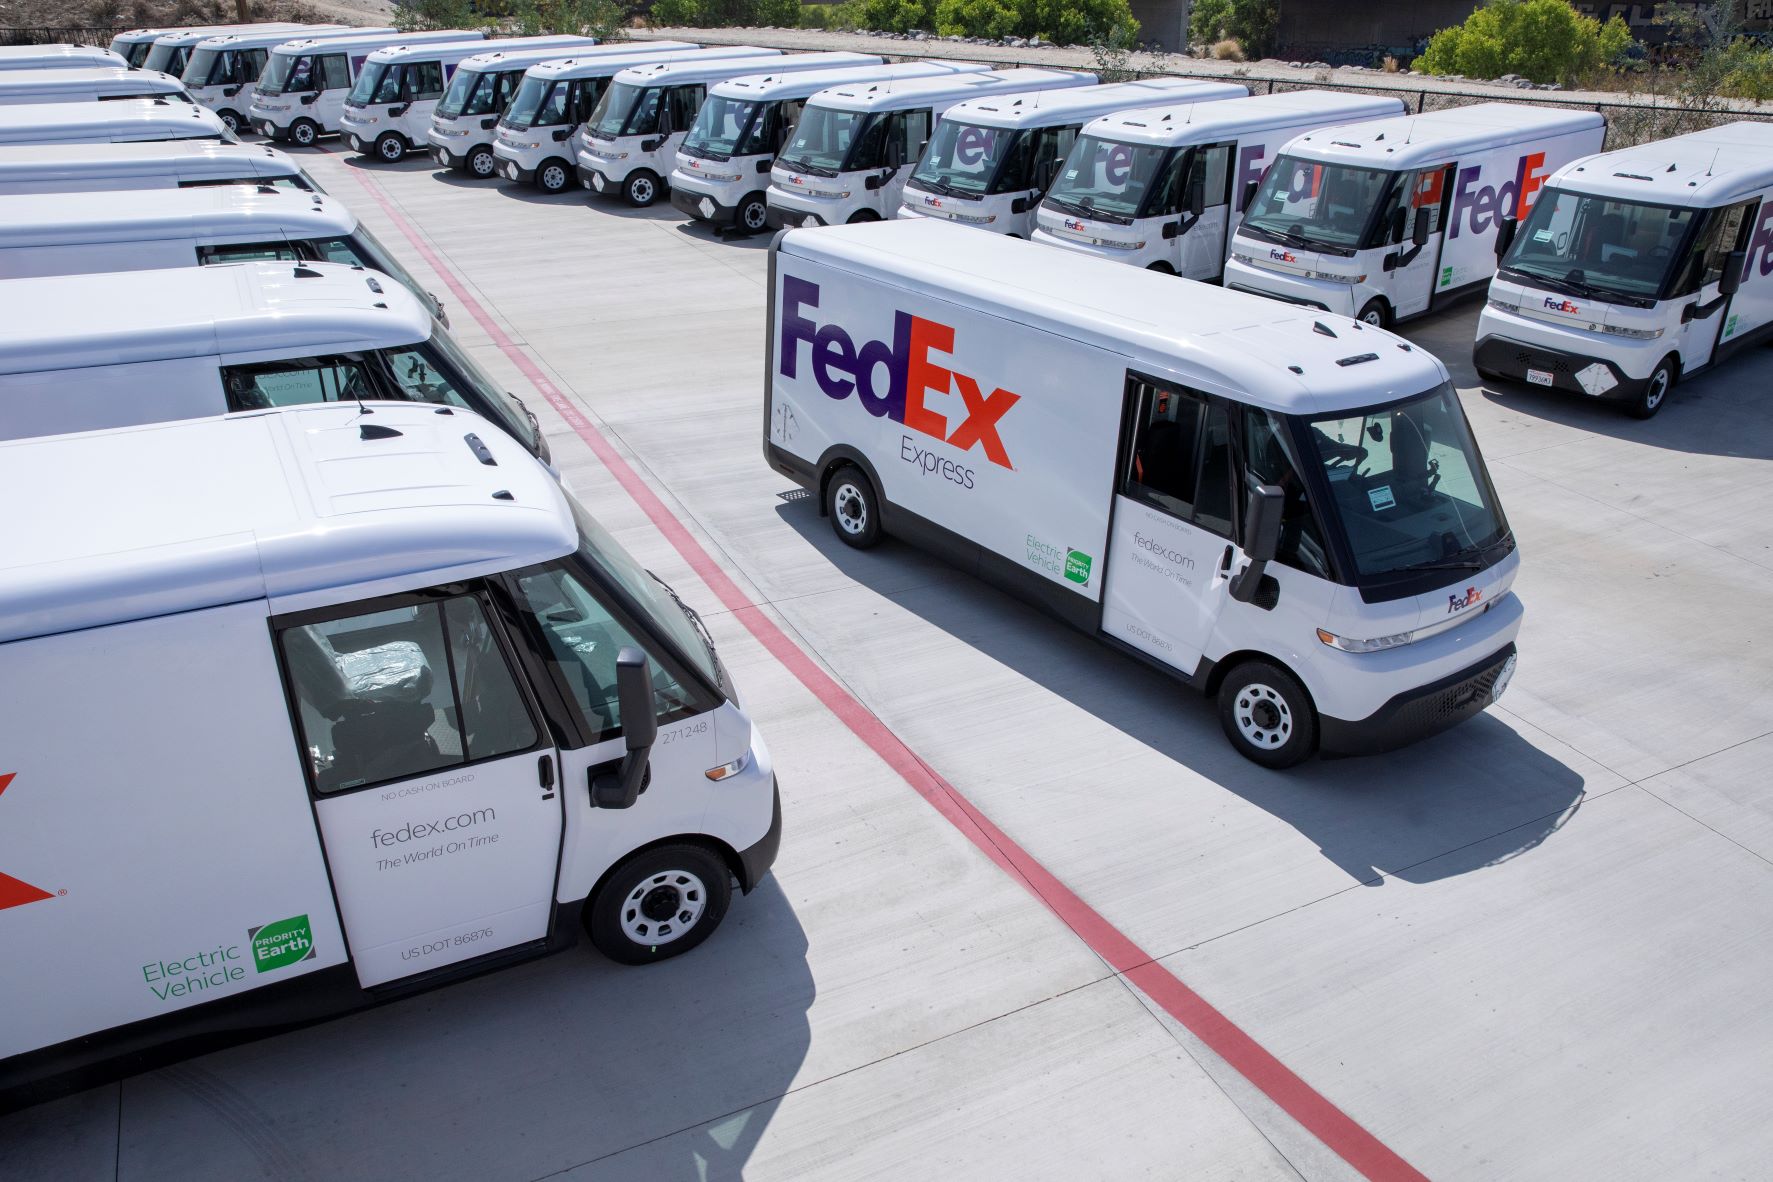 FedEx Continues Advancing Fleet Electrification Goals with Latest 150